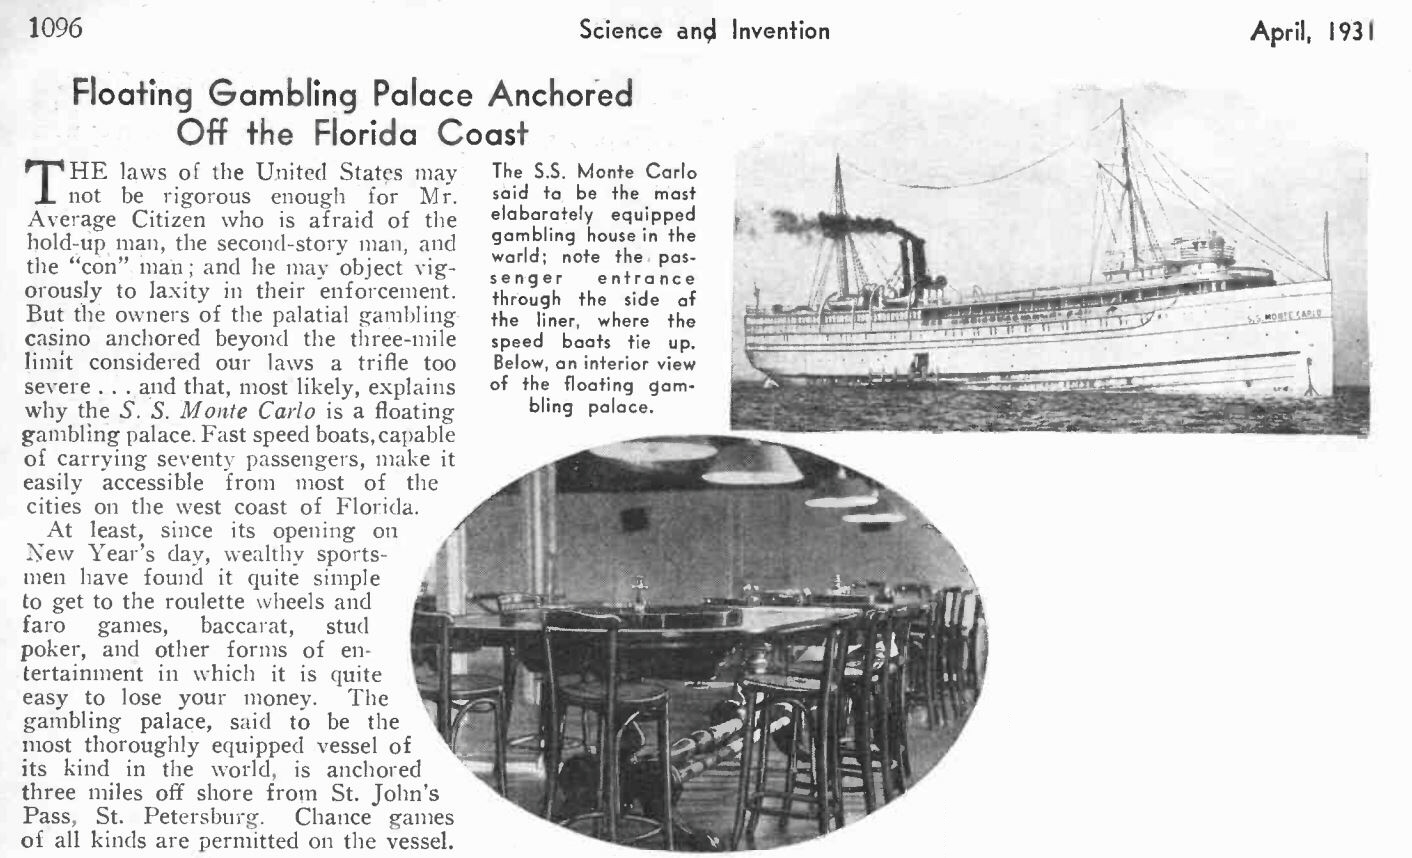 Fate of the S.S. Monte Carlo Gambling Ship - It Really Happened!